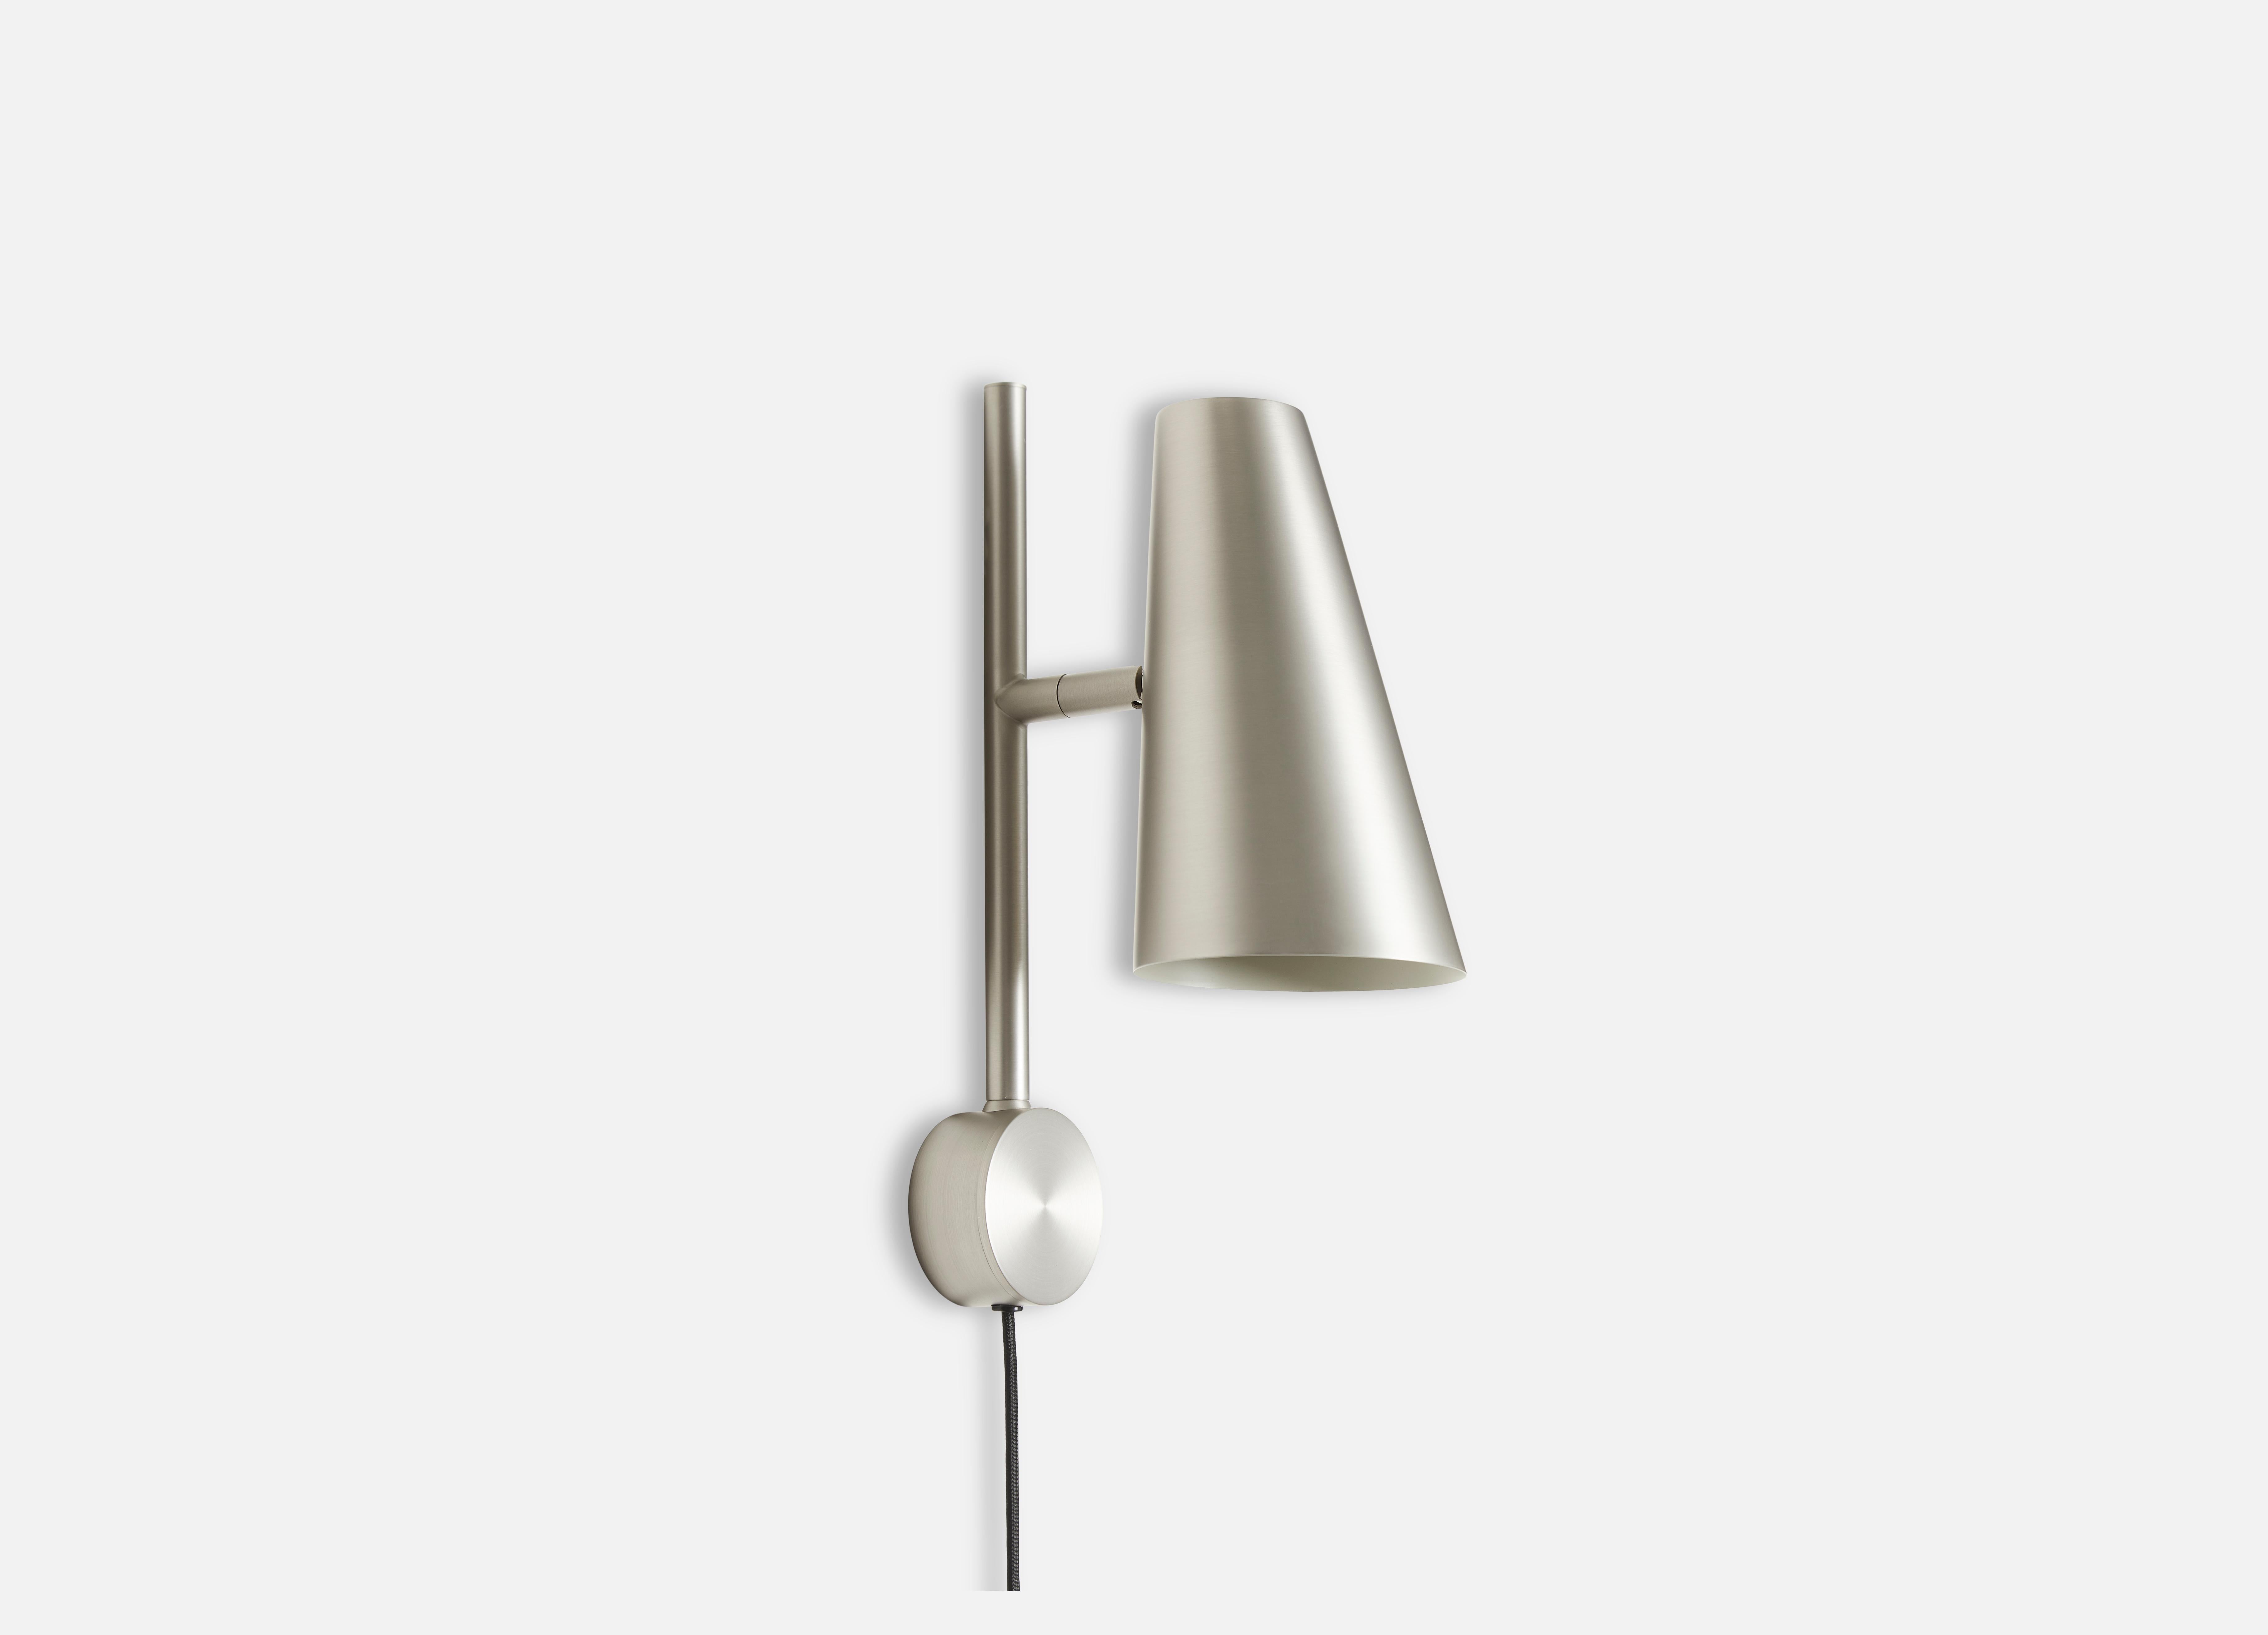 Satin Cono wall lamp by Benny Frandsen.
Materials: metal.
Dimensions: D 11 x W 17 x H 33.3 cm.
Available in black or satin.

Benny Frandsen is a renowned and experienced danish designer and founder of the lighting company frandsen, which has